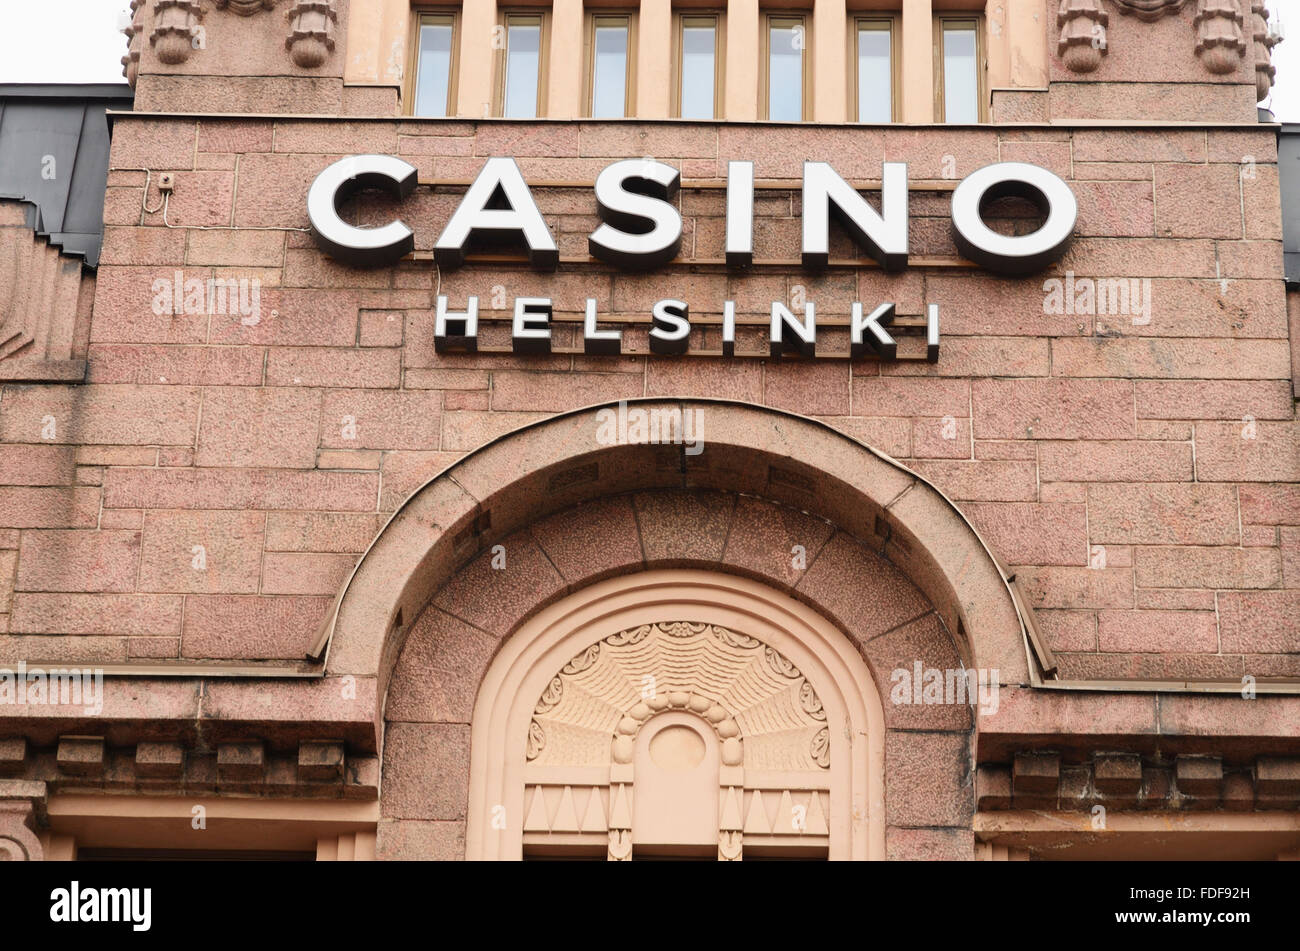 Casino Helsinki is the world's only casino that donates all of its profits to charity. Helsinki. Finland Stock Photo